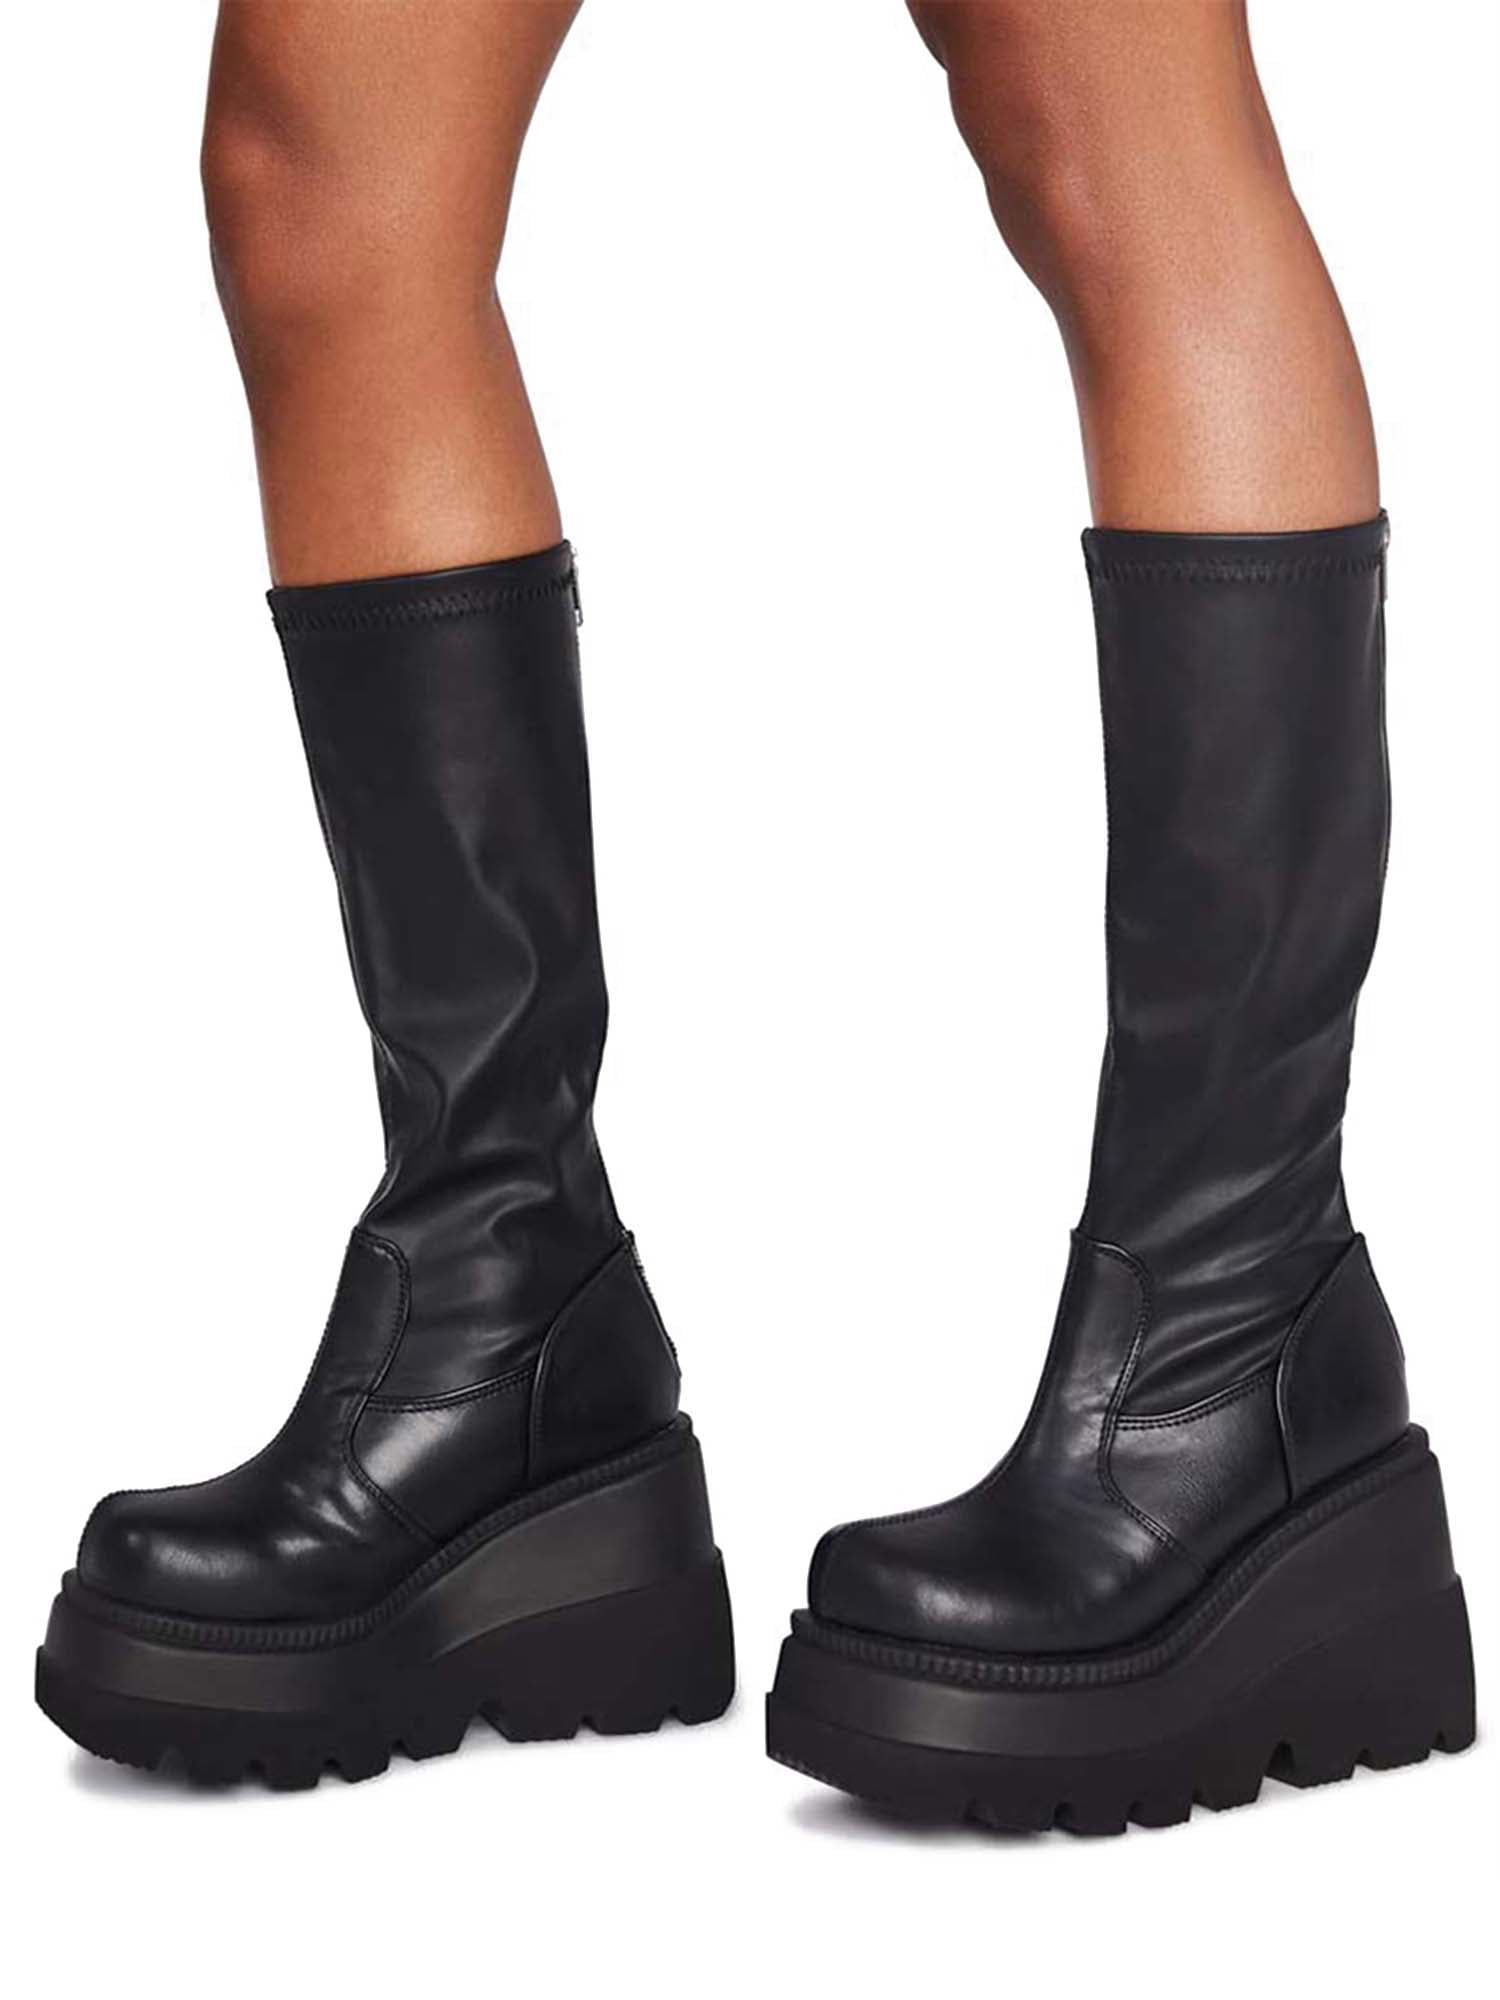 Womens Round Toe High Heel Platform Mid-Calf High Boots Cosplay Shoes 46 47 48 L